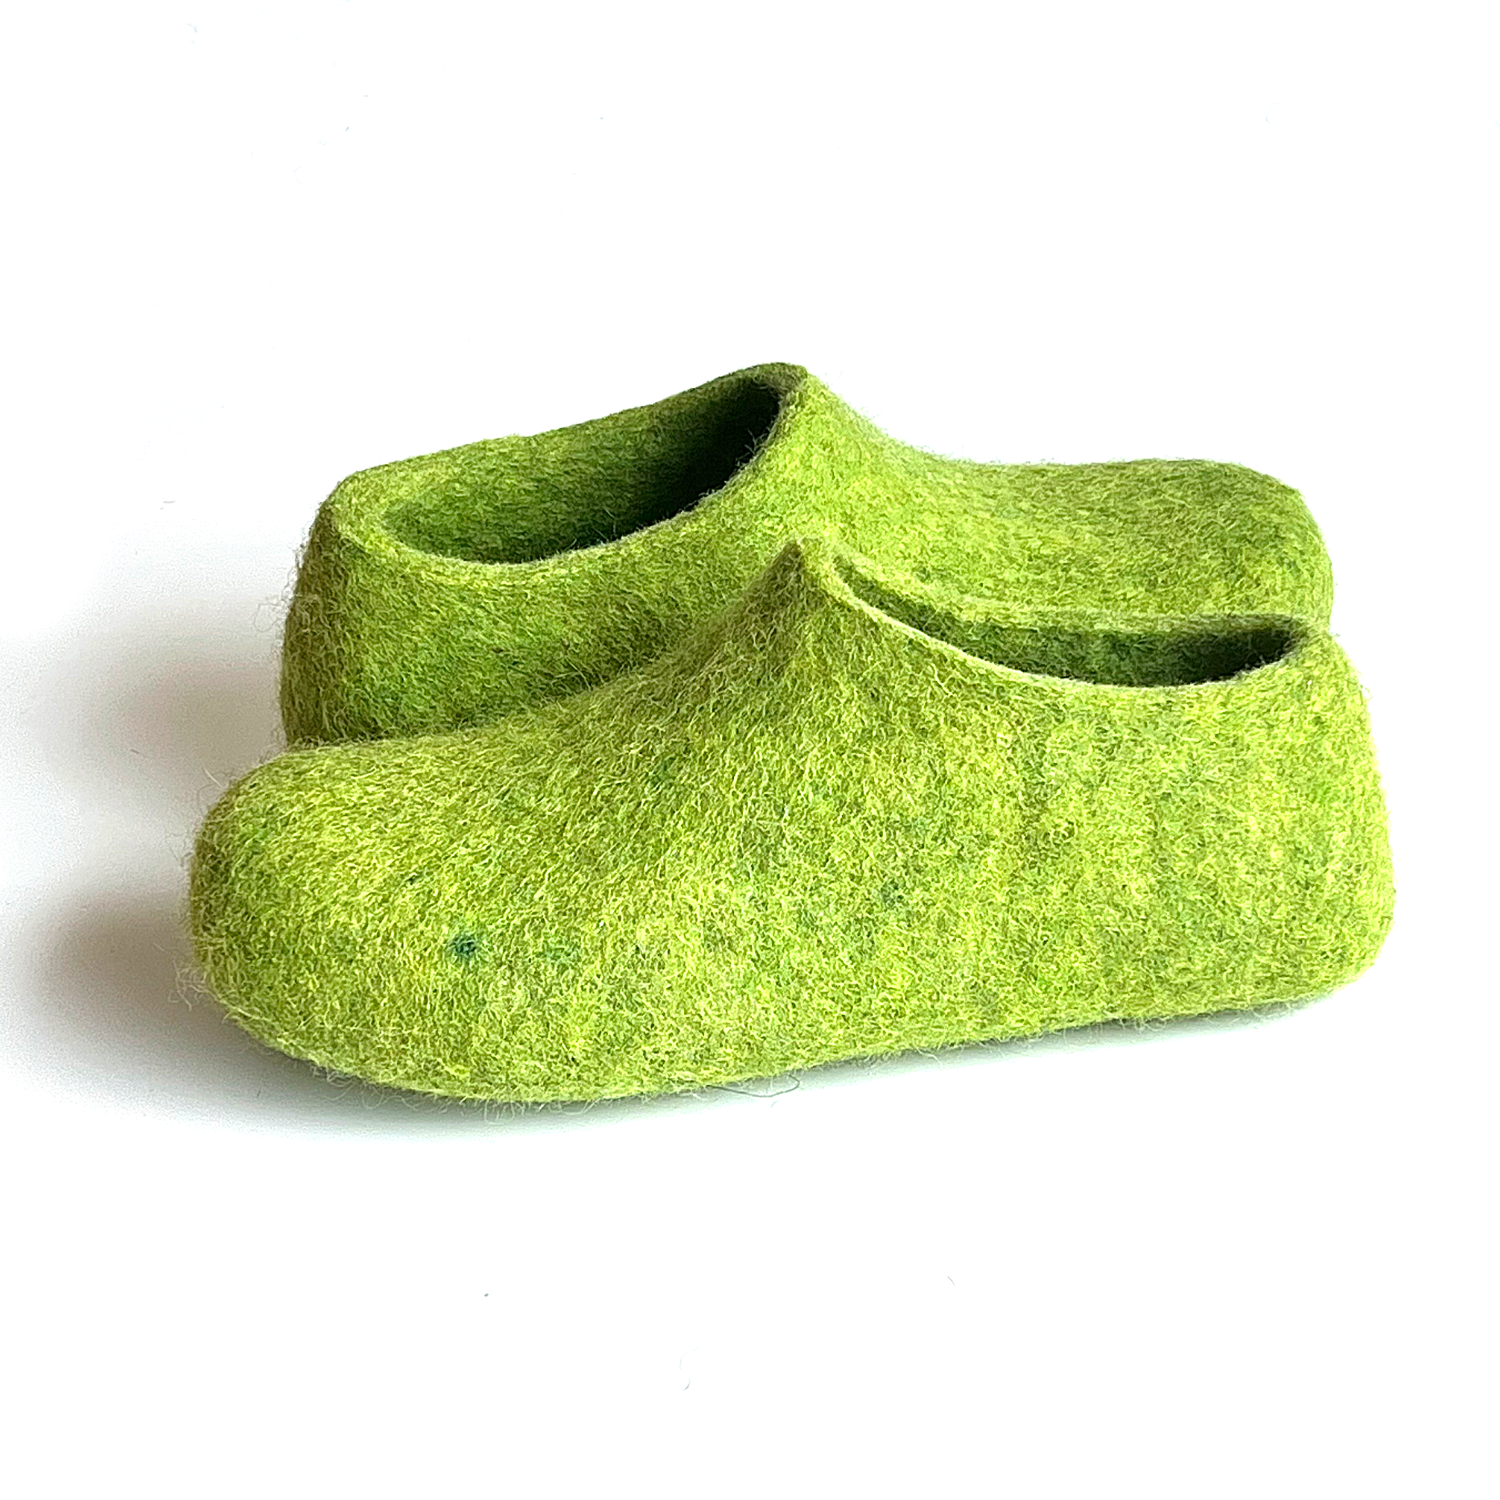 Felted Wool Room Slippers Lime  Green Vivid FELTFORMA Barefoot shoes gifts for her.png